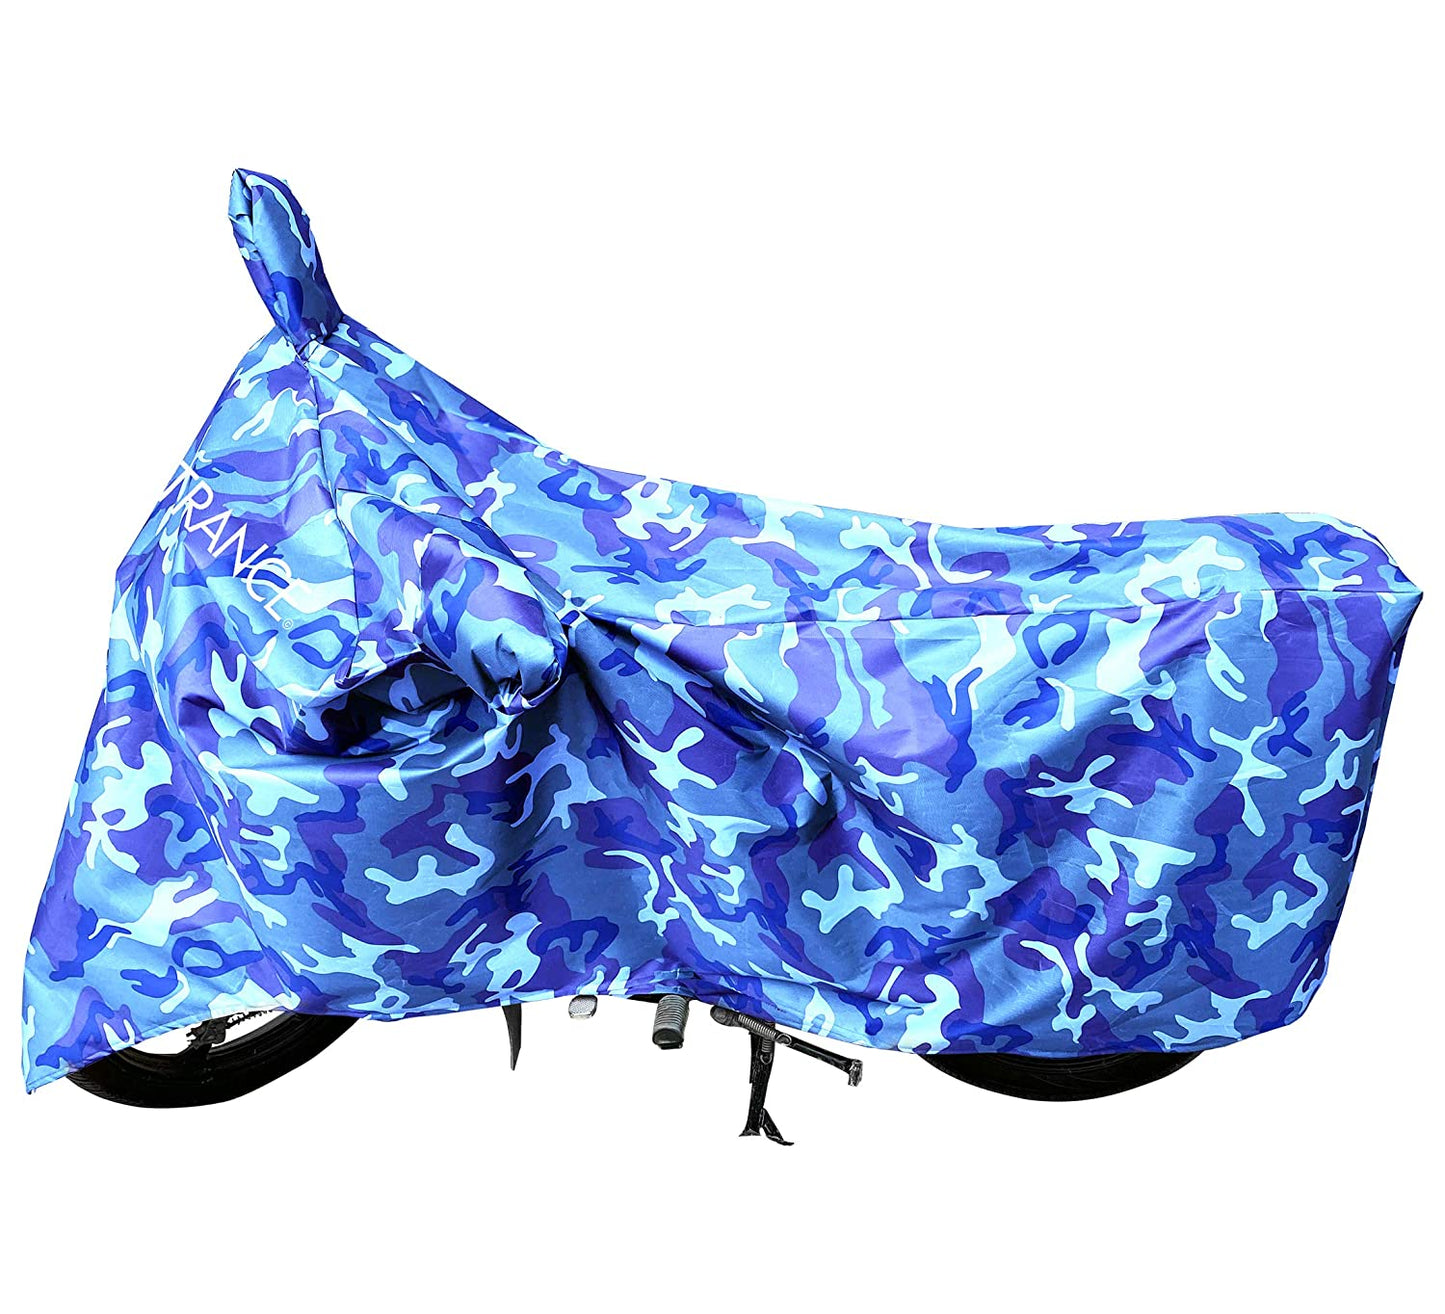 MotoTrance Jungle Bike Body Covers For TVS Flame 125 - Interlock-Stitched Waterproof and Heat Resistant with Mirror Pockets